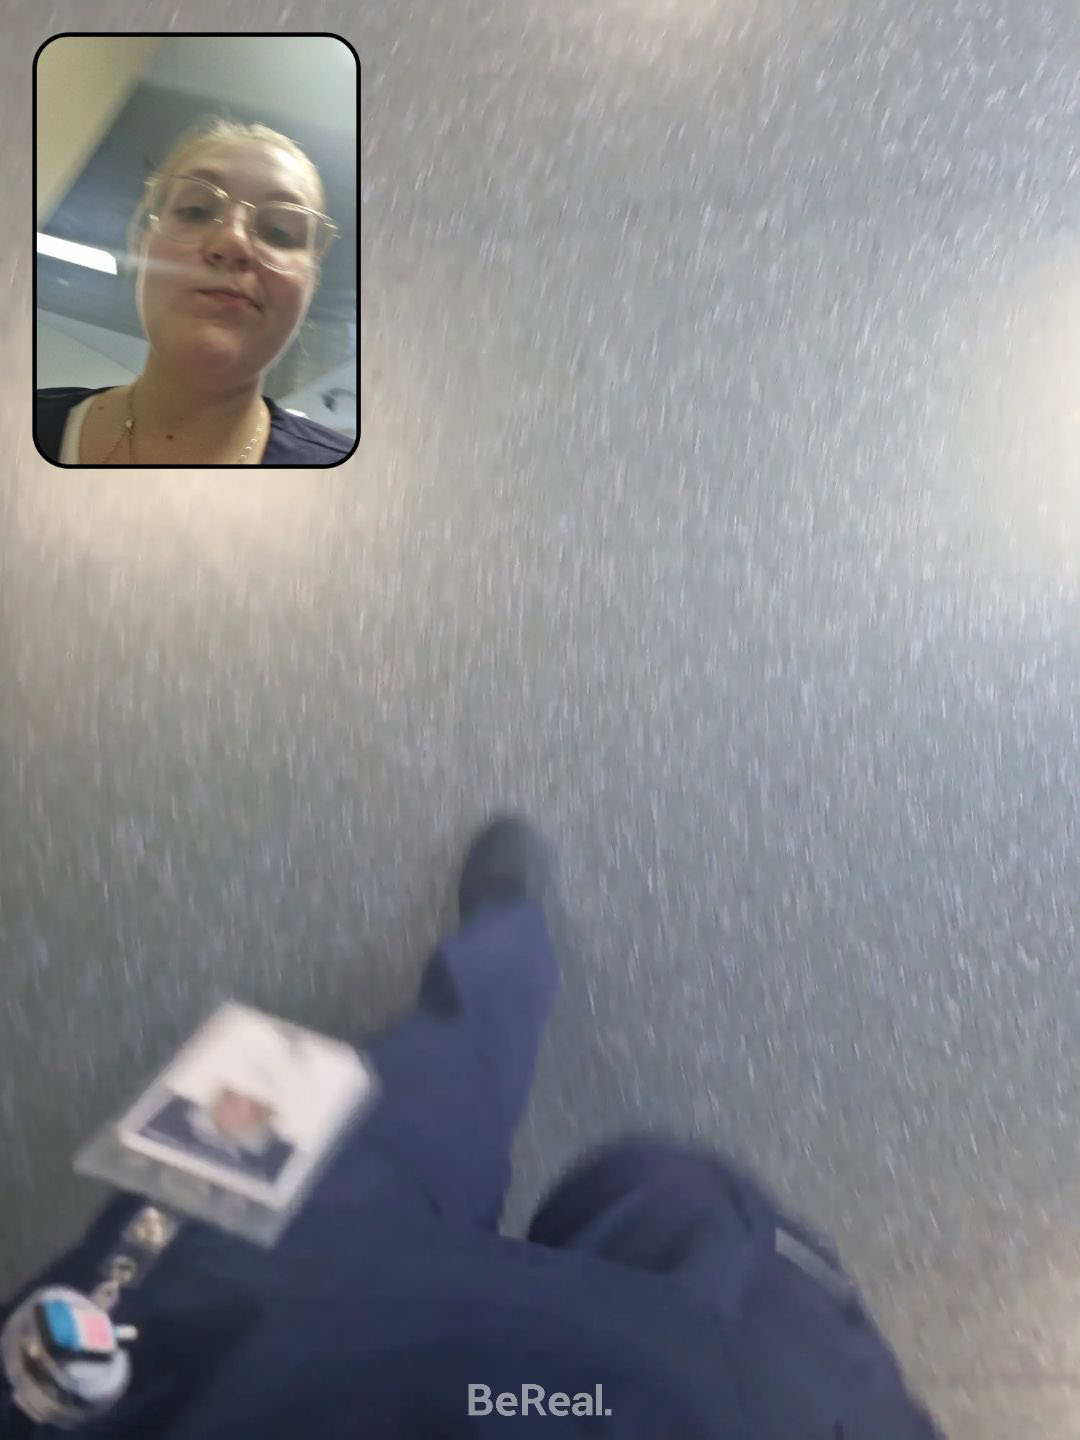 A screen grab of a video of feet walking on the linoleum floor of a hospital hallway, inset is a photo of Siobhan's face and she is frowning as she rushes to where she is meant to be.